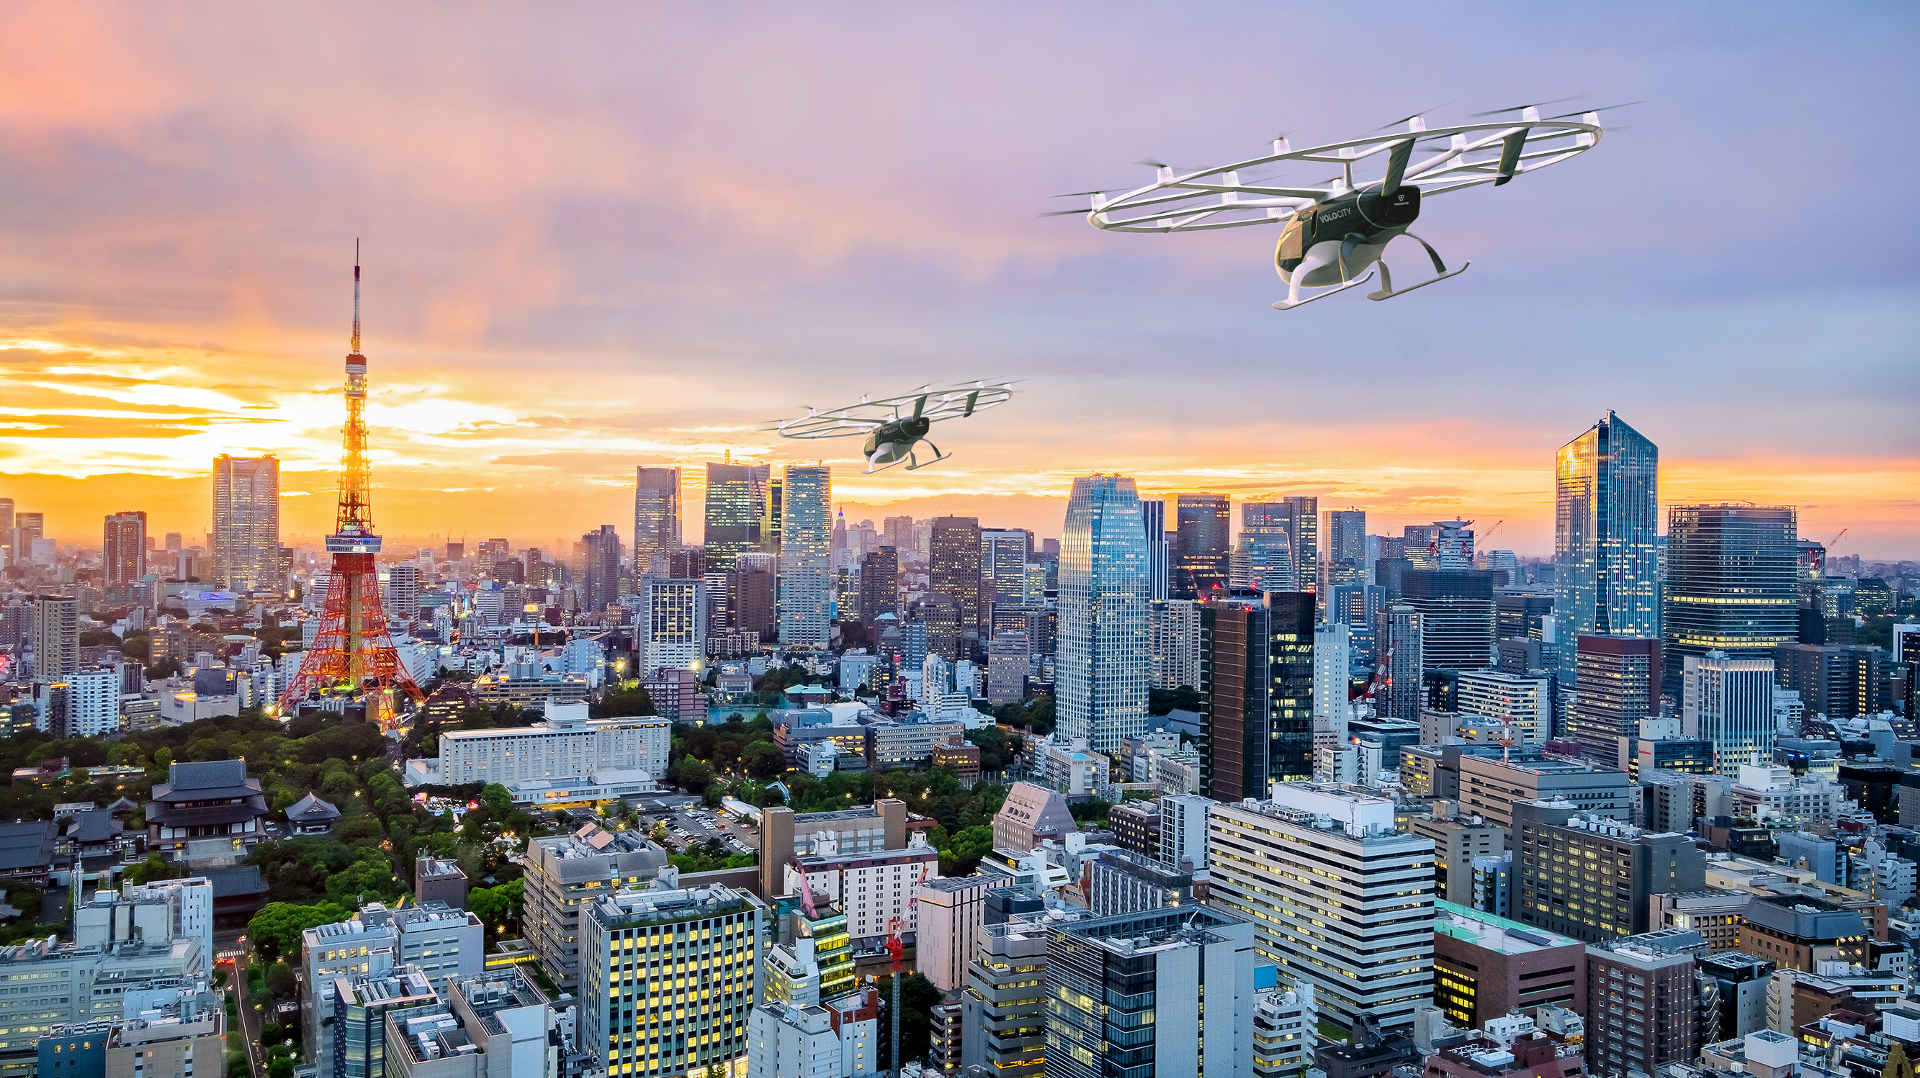 A picture of a Volocopter UAM vehicle flying over a Japanese city.